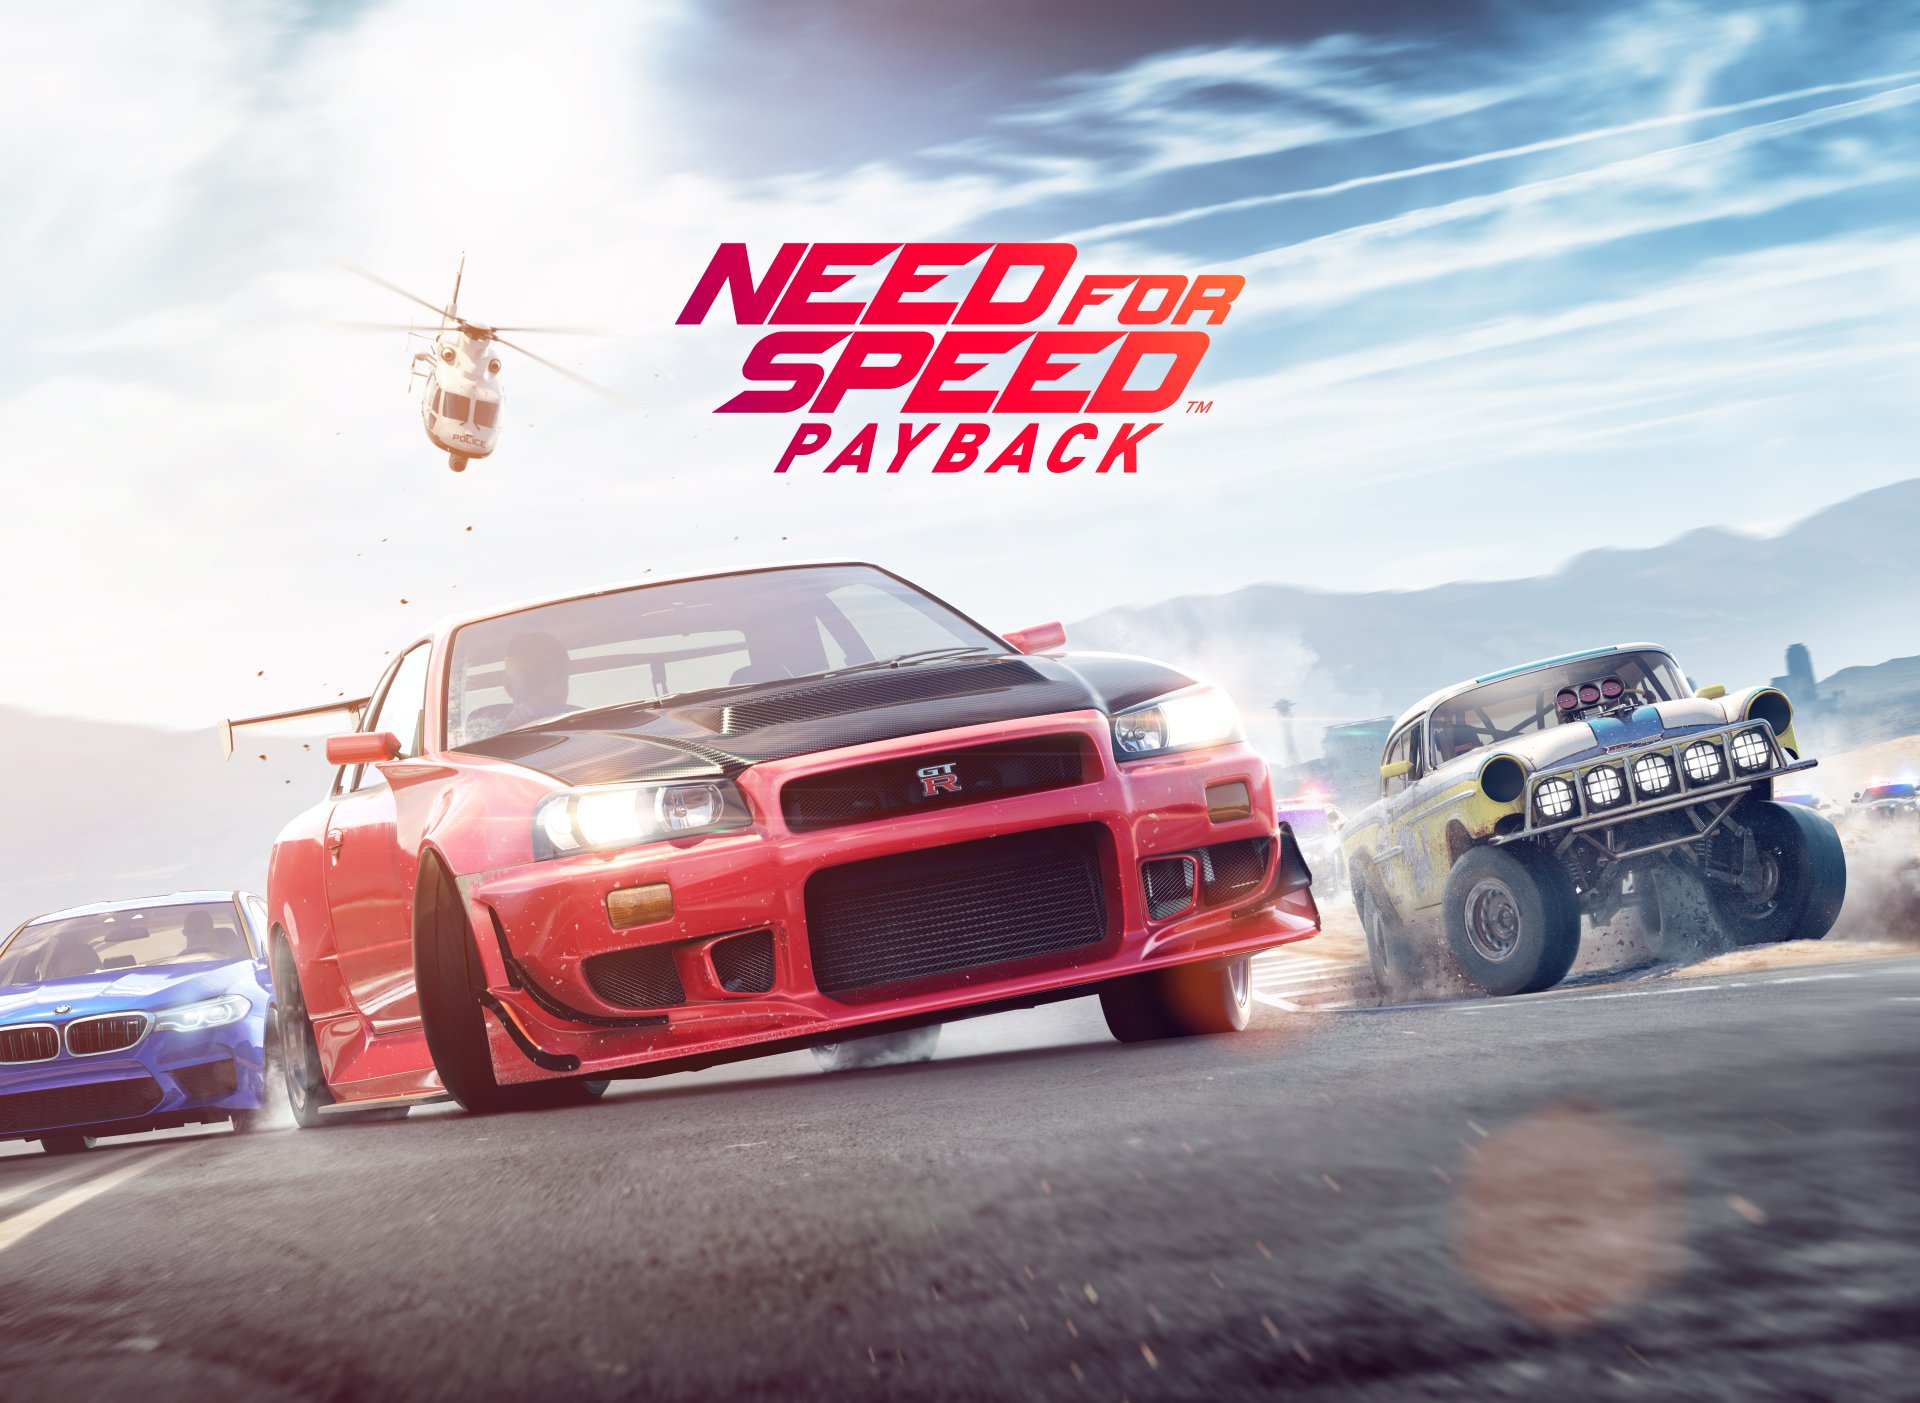 Need For Speed Payback 8k Ultra HD Wallpaper Background Image